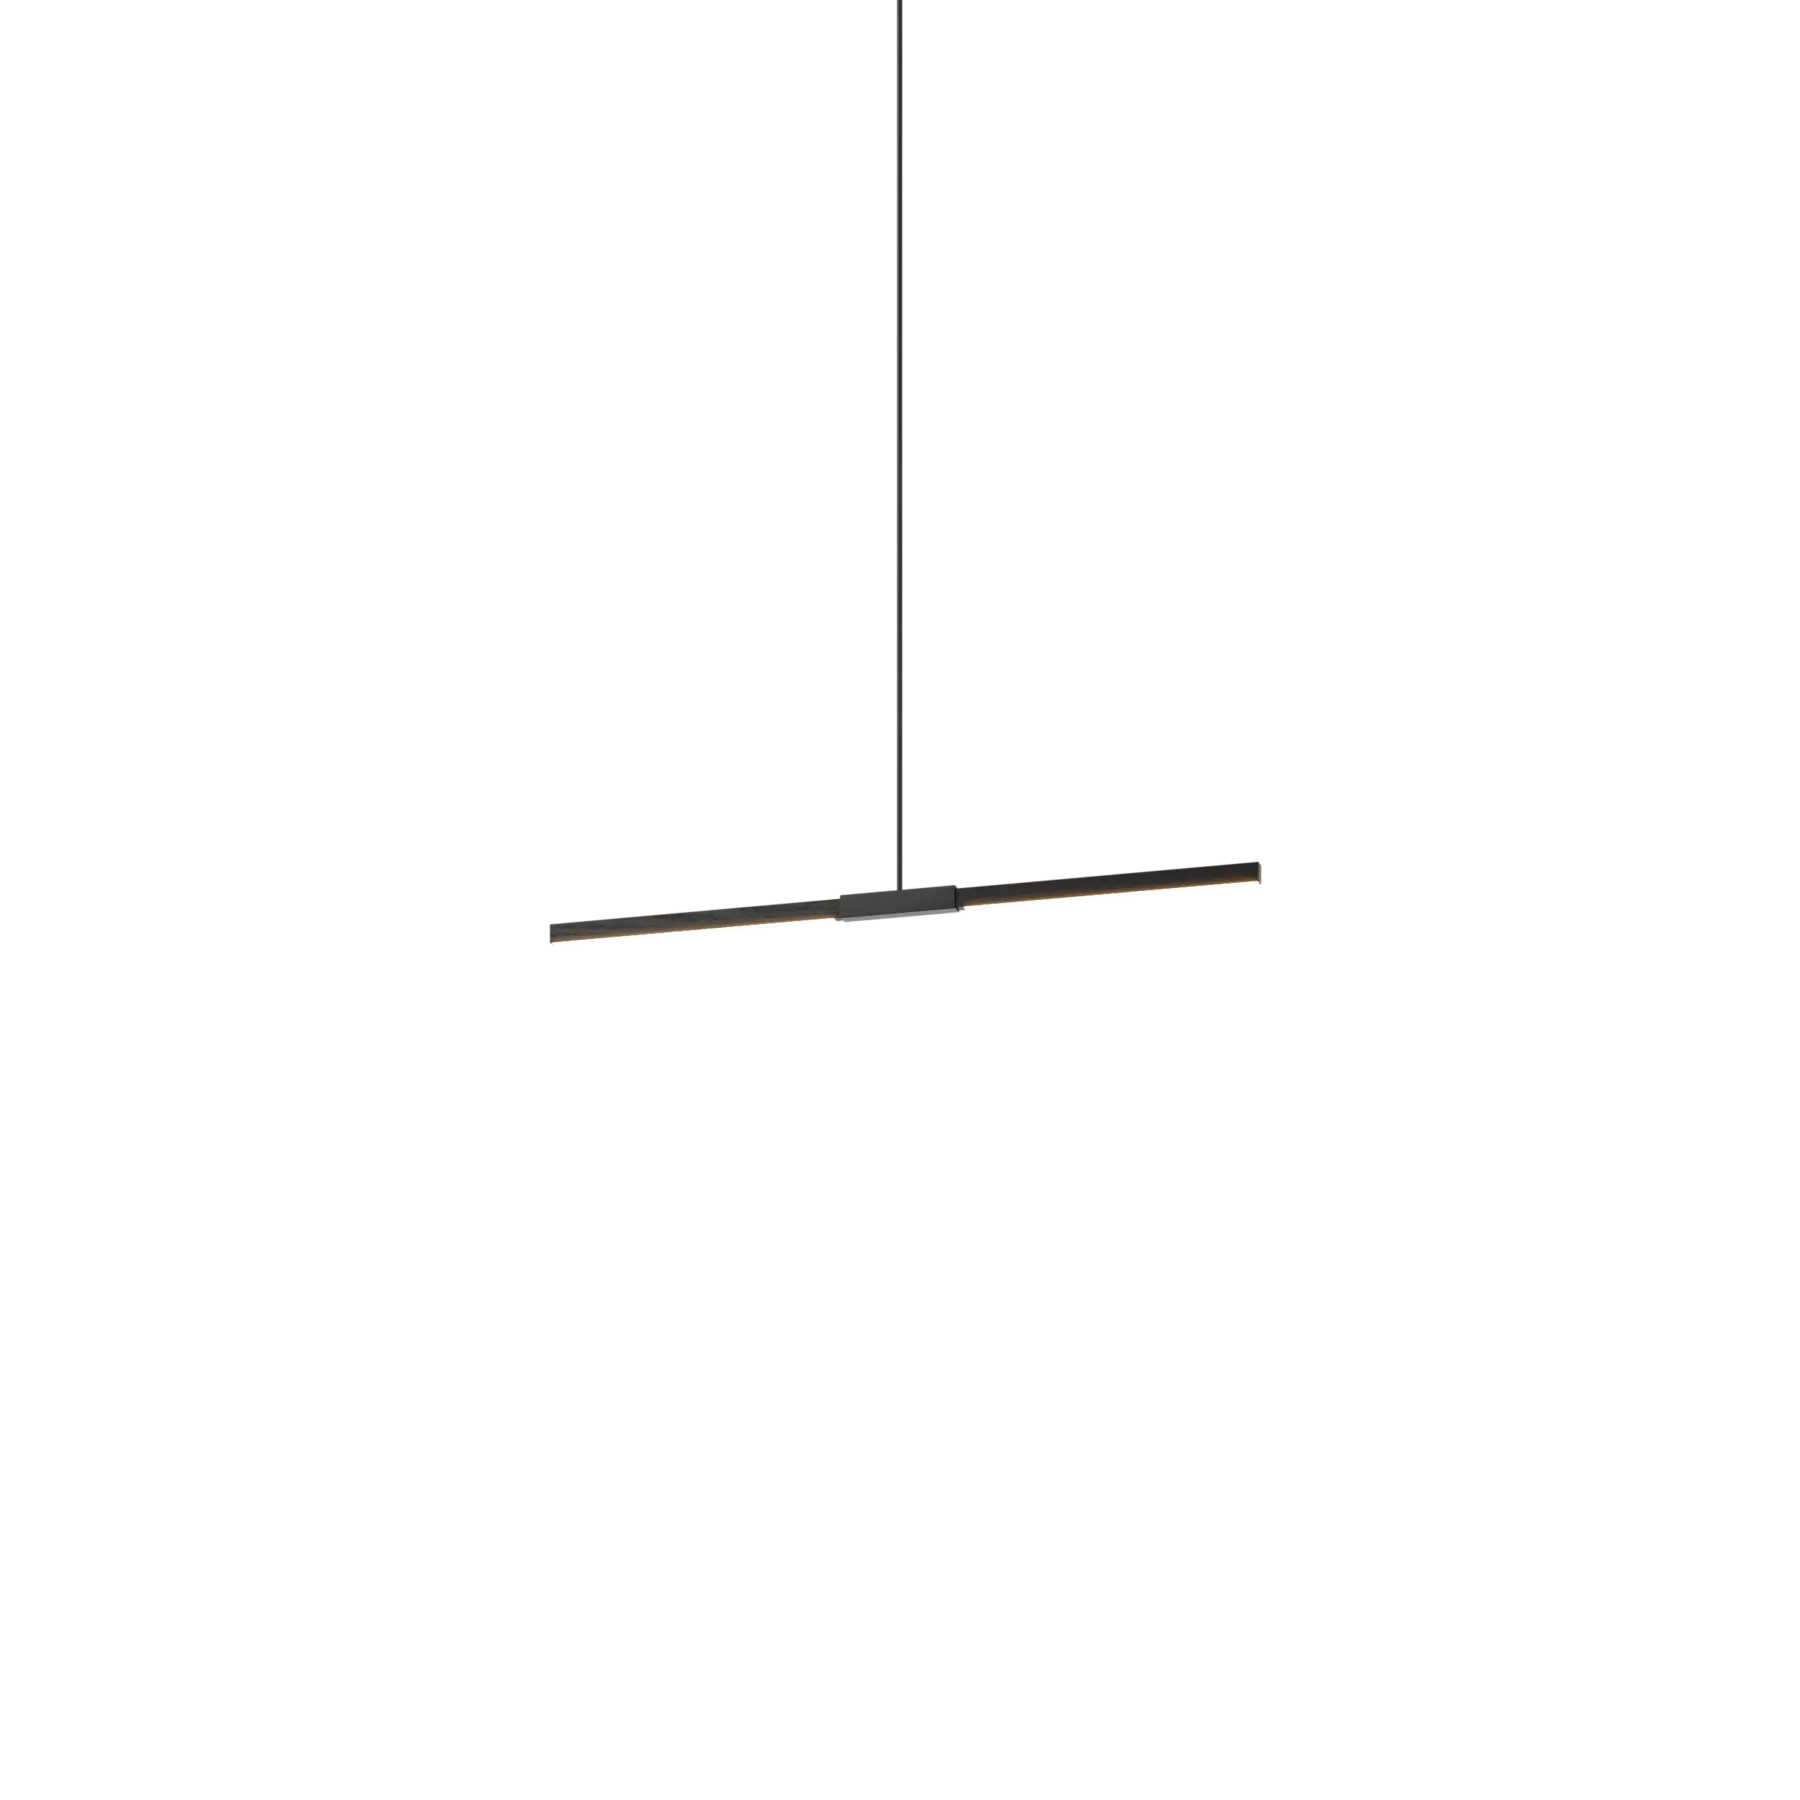 Image of a Stickbulb Linear Pendant lighting fixture. The modern fixture consists of sleek wooden beams with multiple integrated LED bulbs.